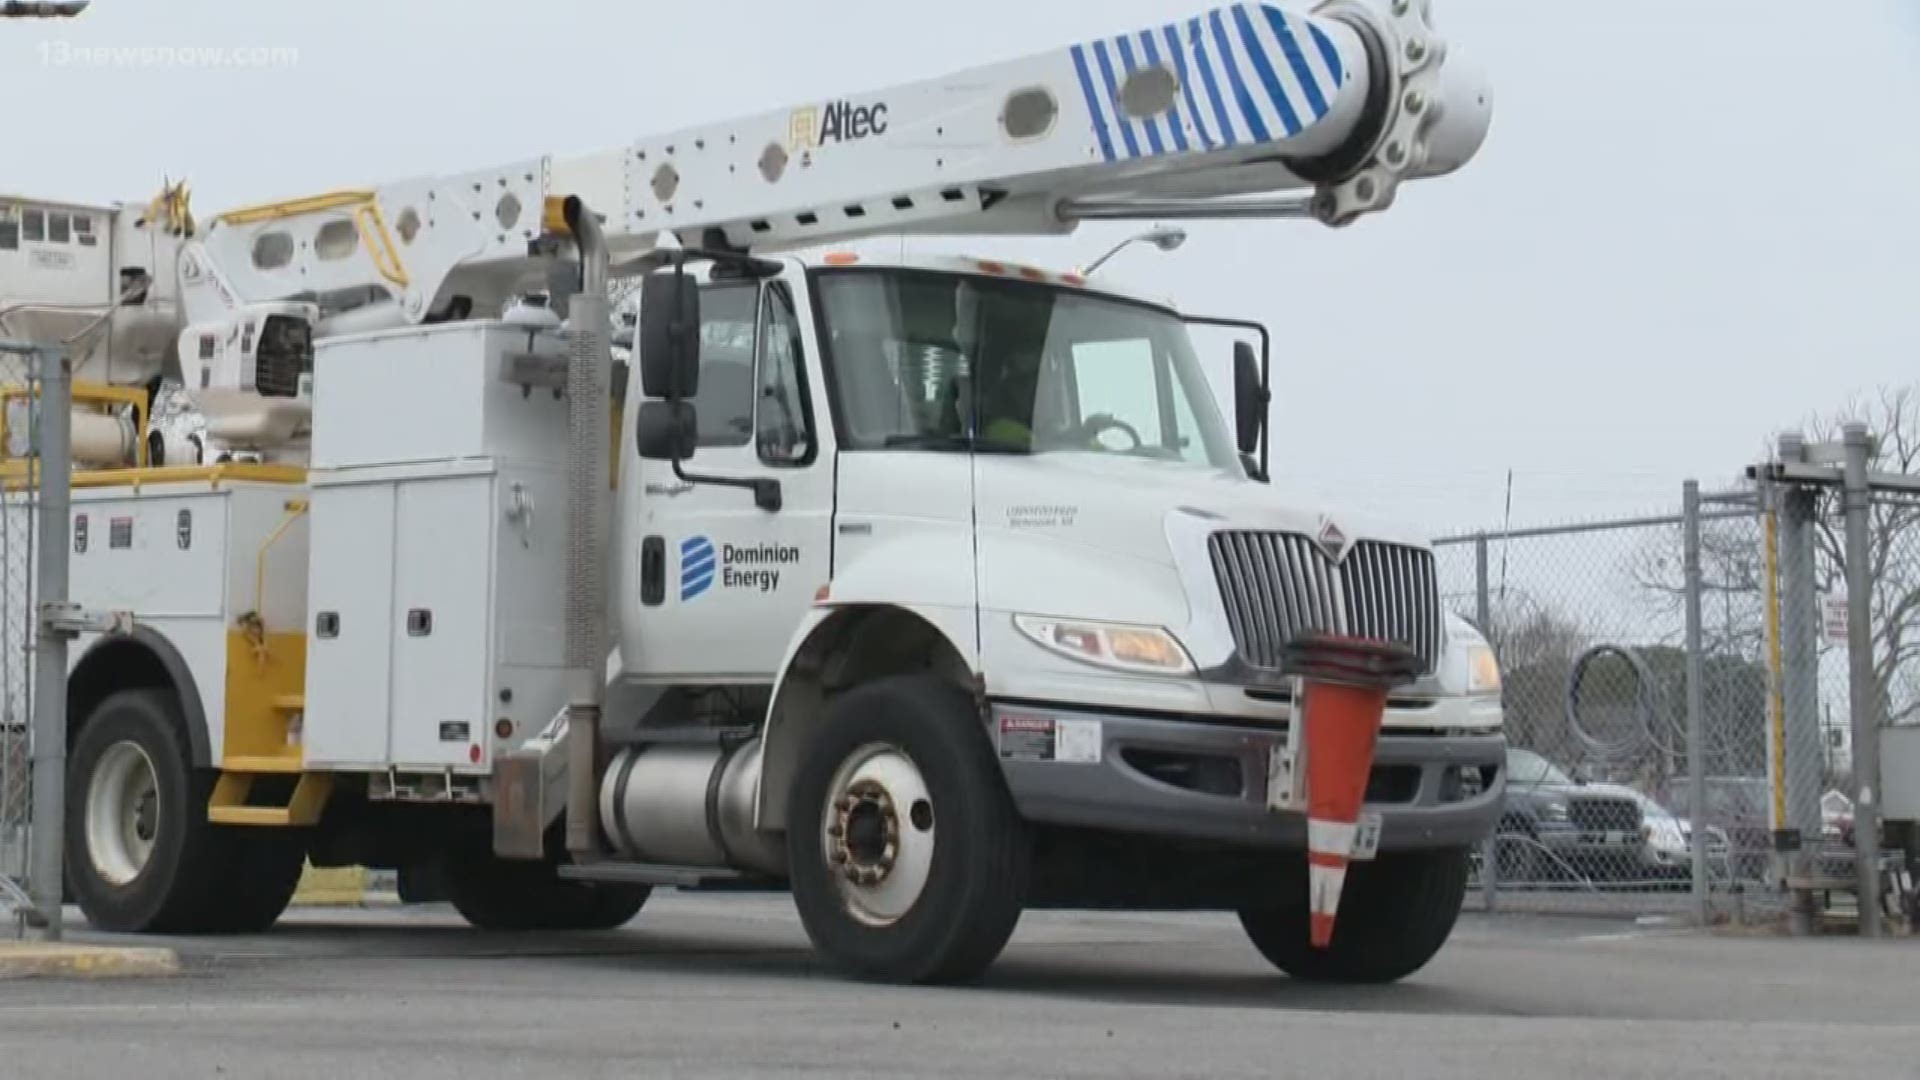 13News Now Allison Bazzle spoke with Dominion Energy officials and crews who say they're prepared  to respond to any outages from winter weather.